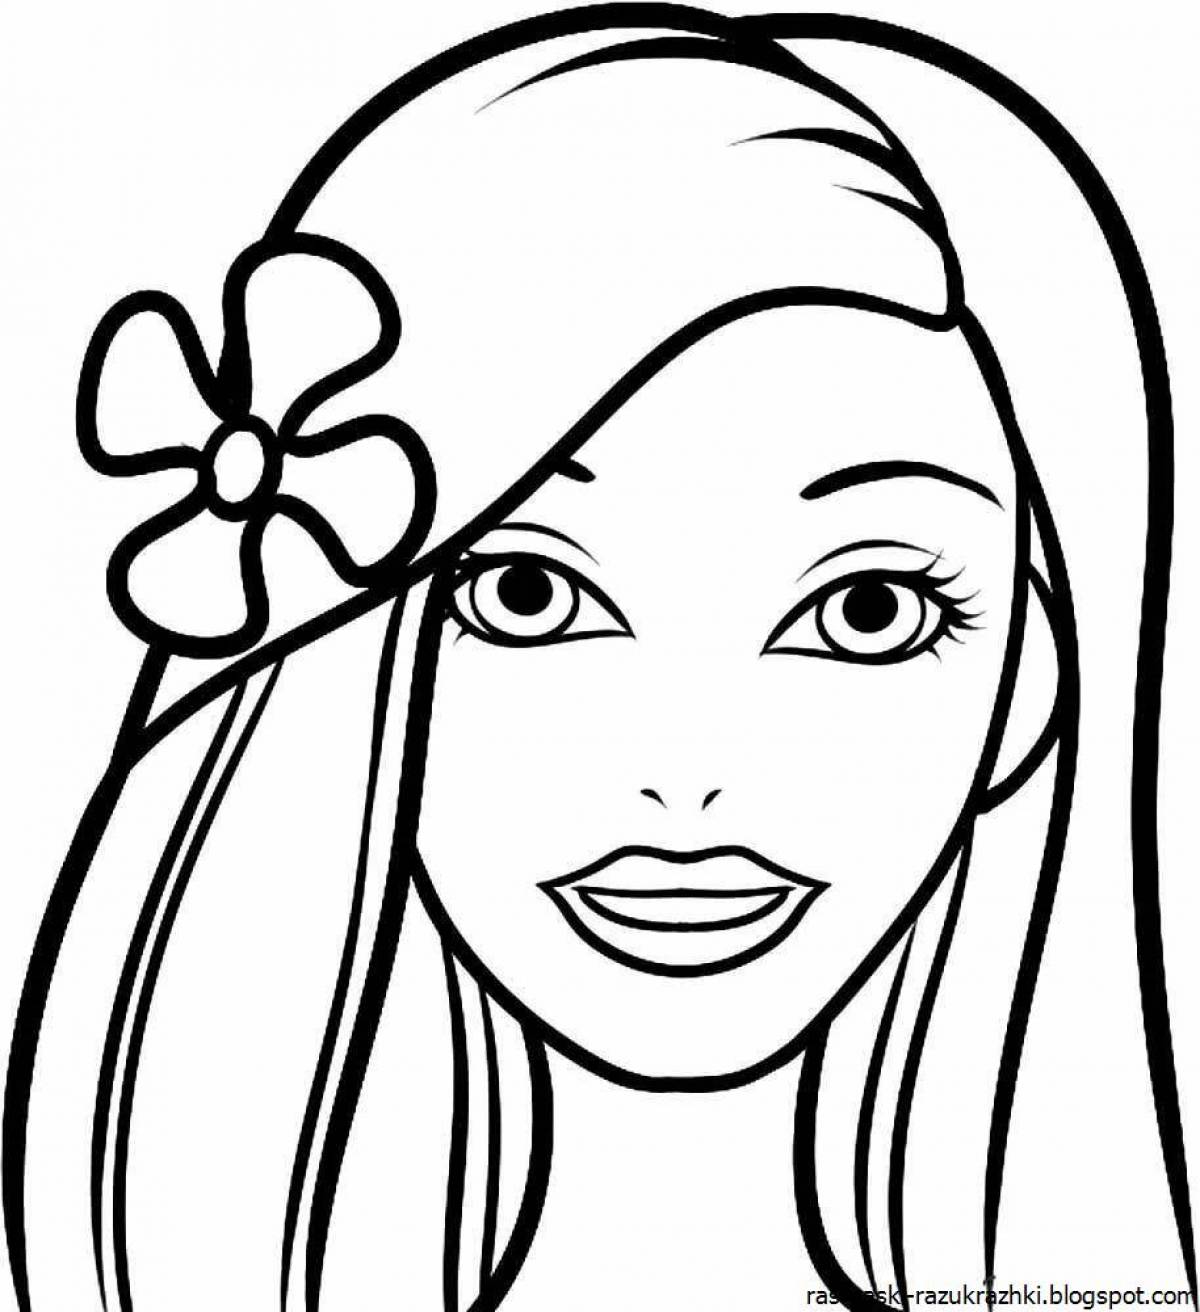 Glowing human face coloring page